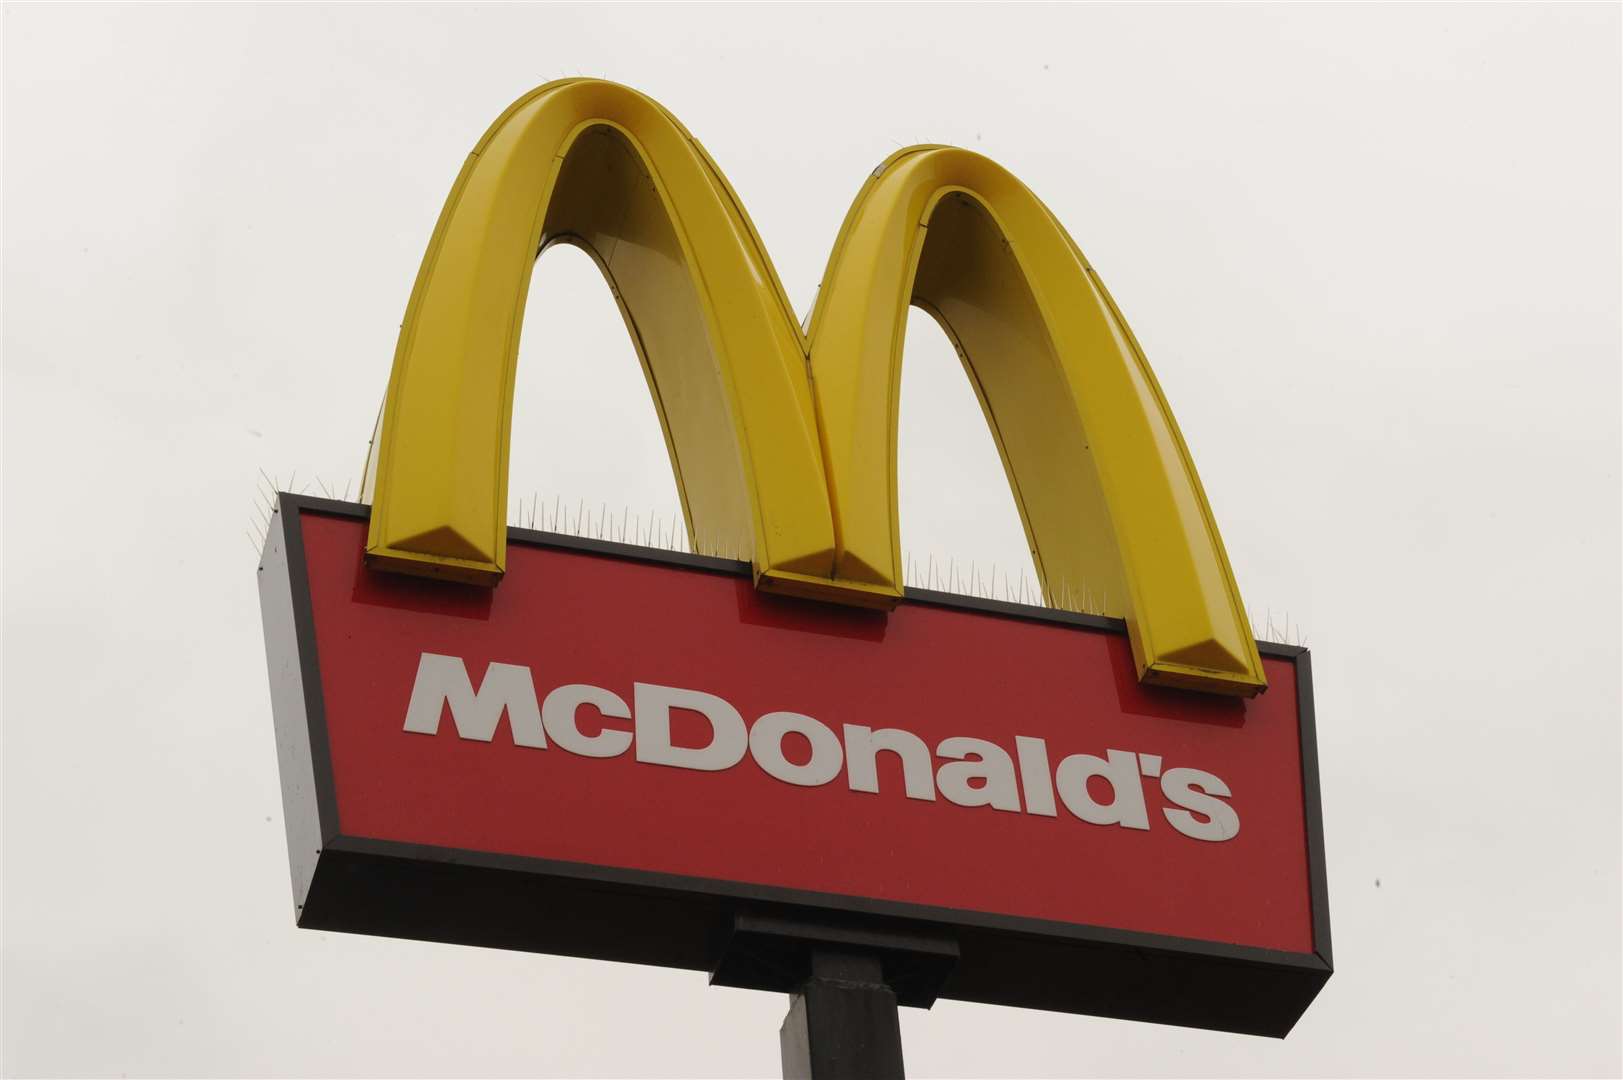 McDonald's has launched its McDelivery service in Sevenoaks